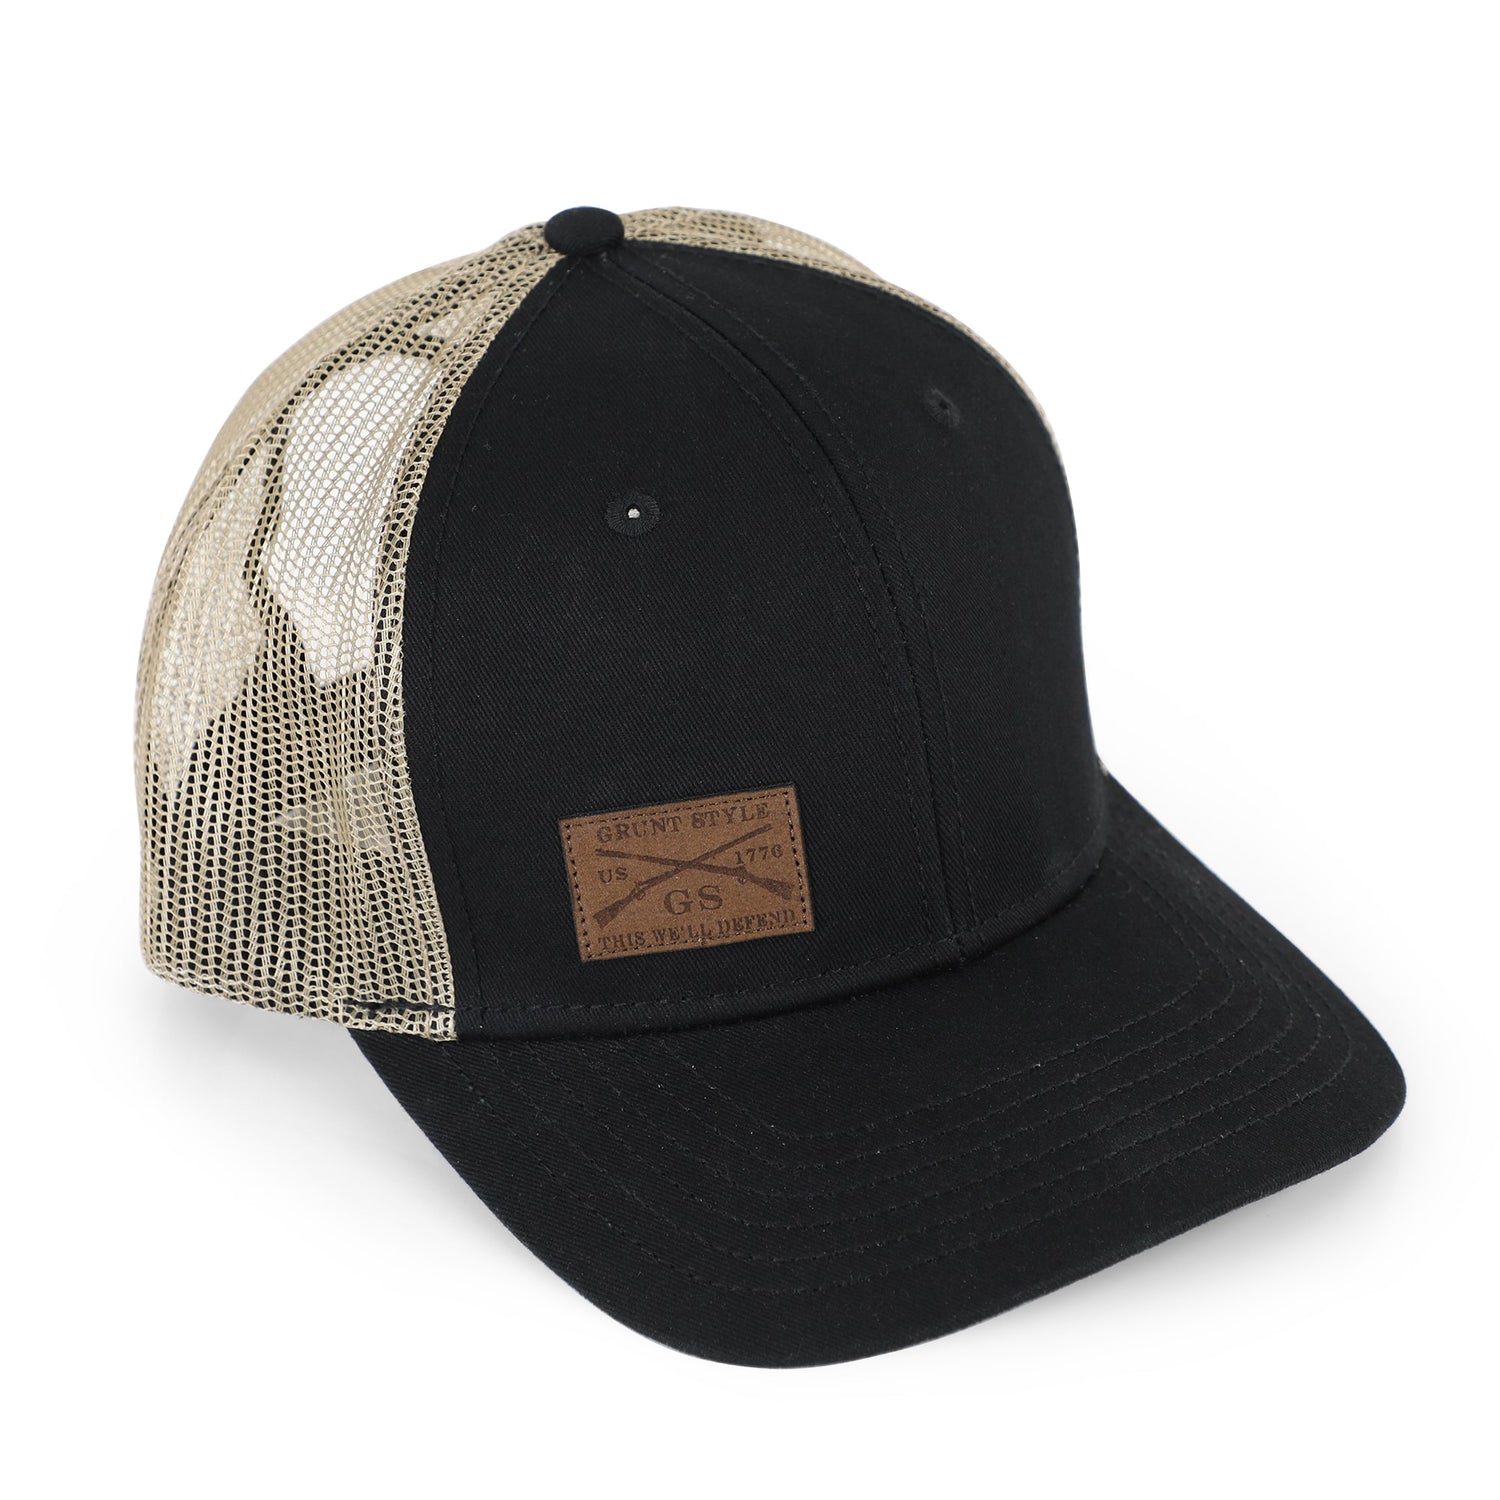 veteran leather patch hat